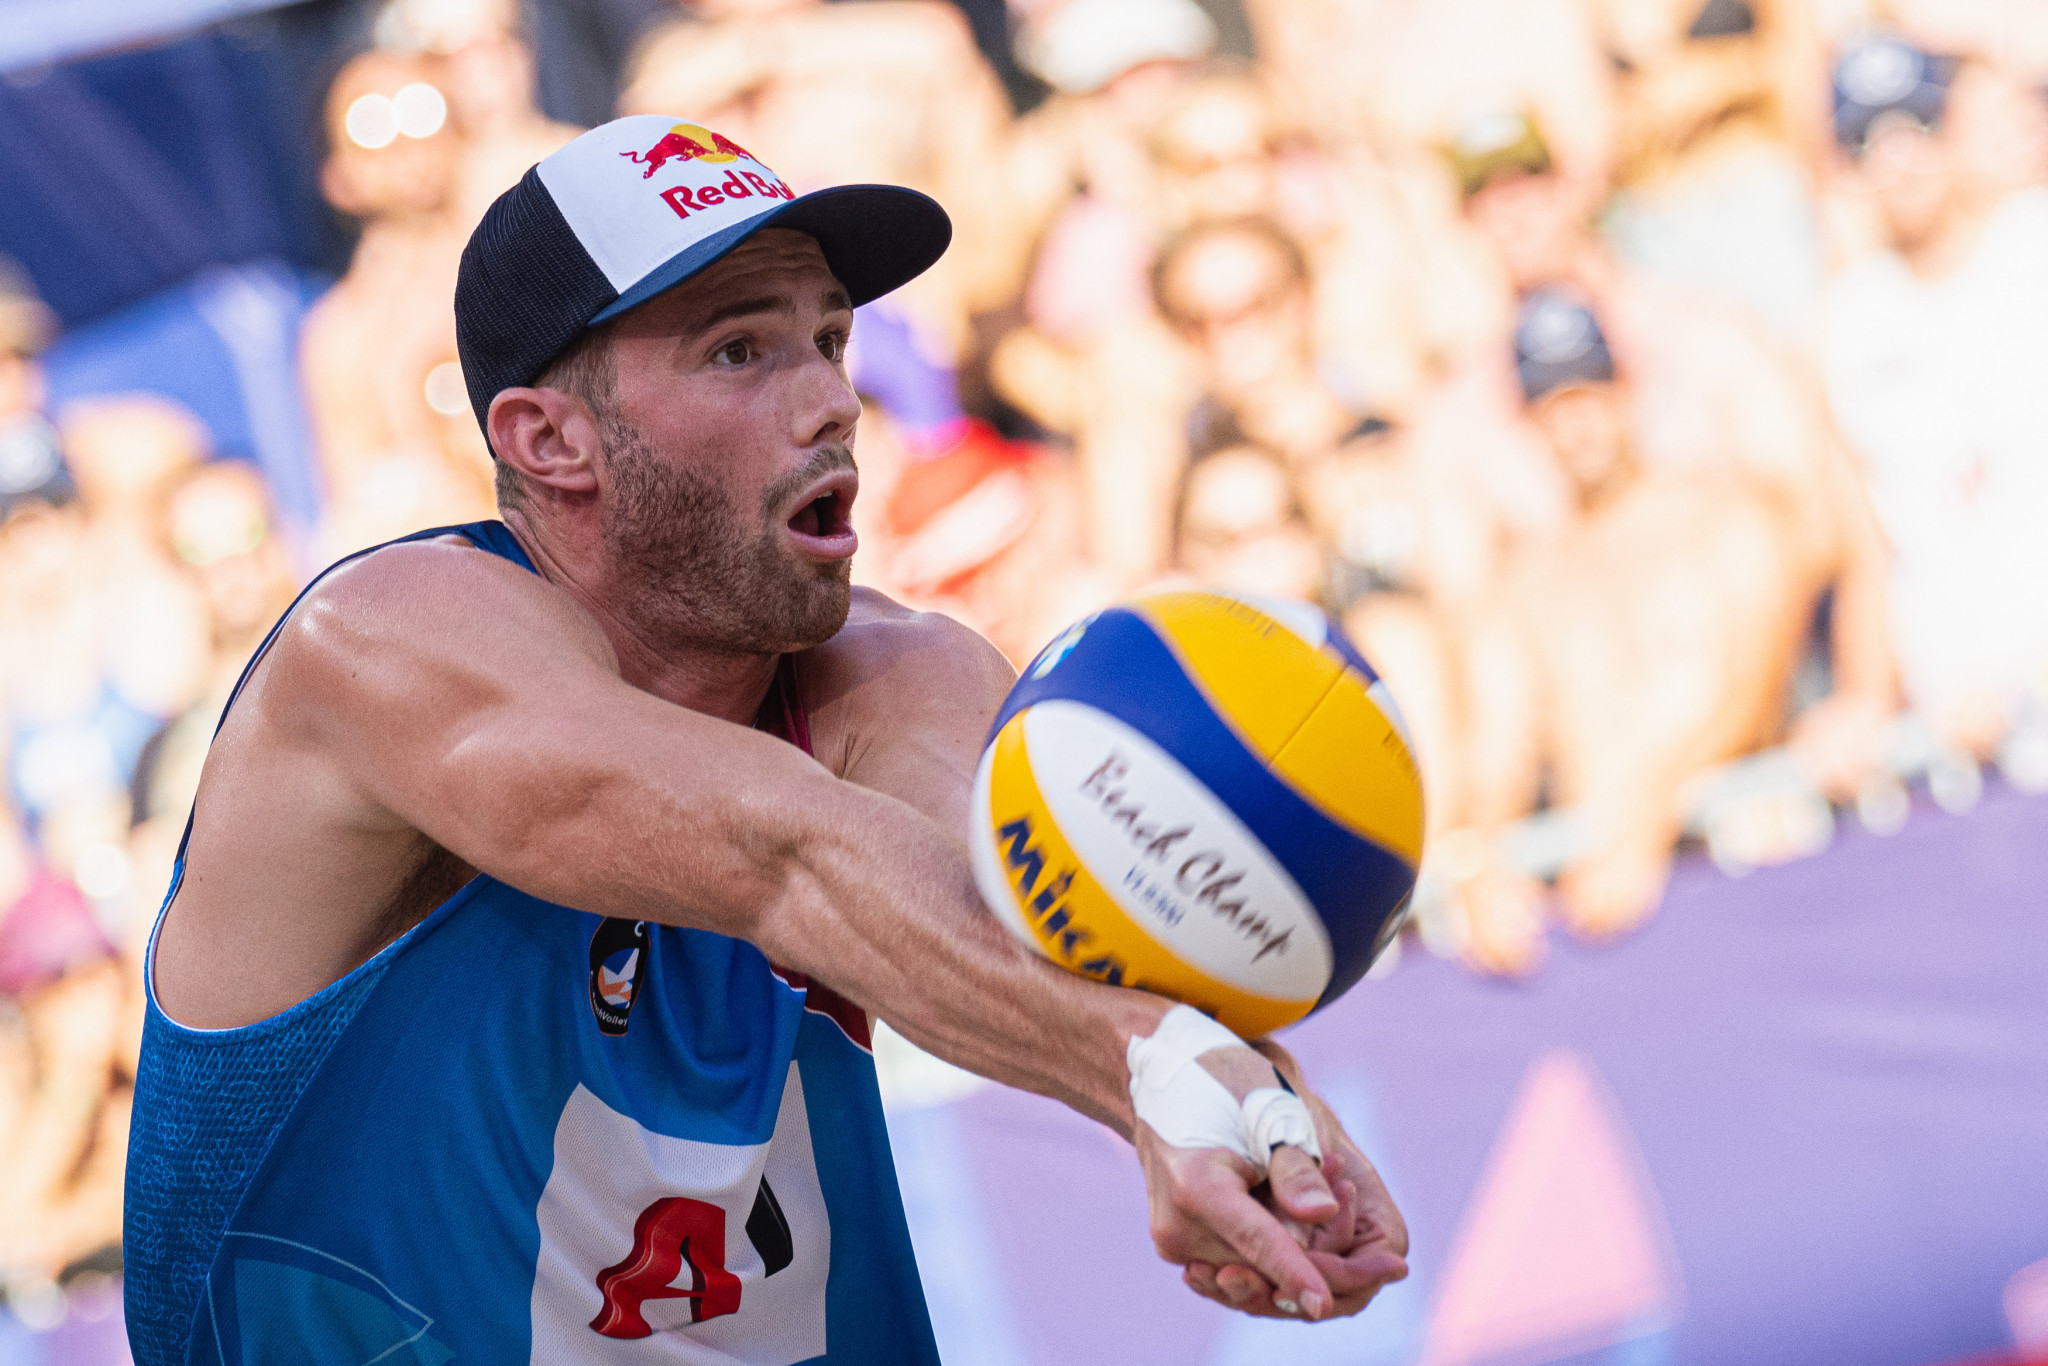 Olympic champions exit Jūrmala Beach Volleyball Pro Tour due to injury